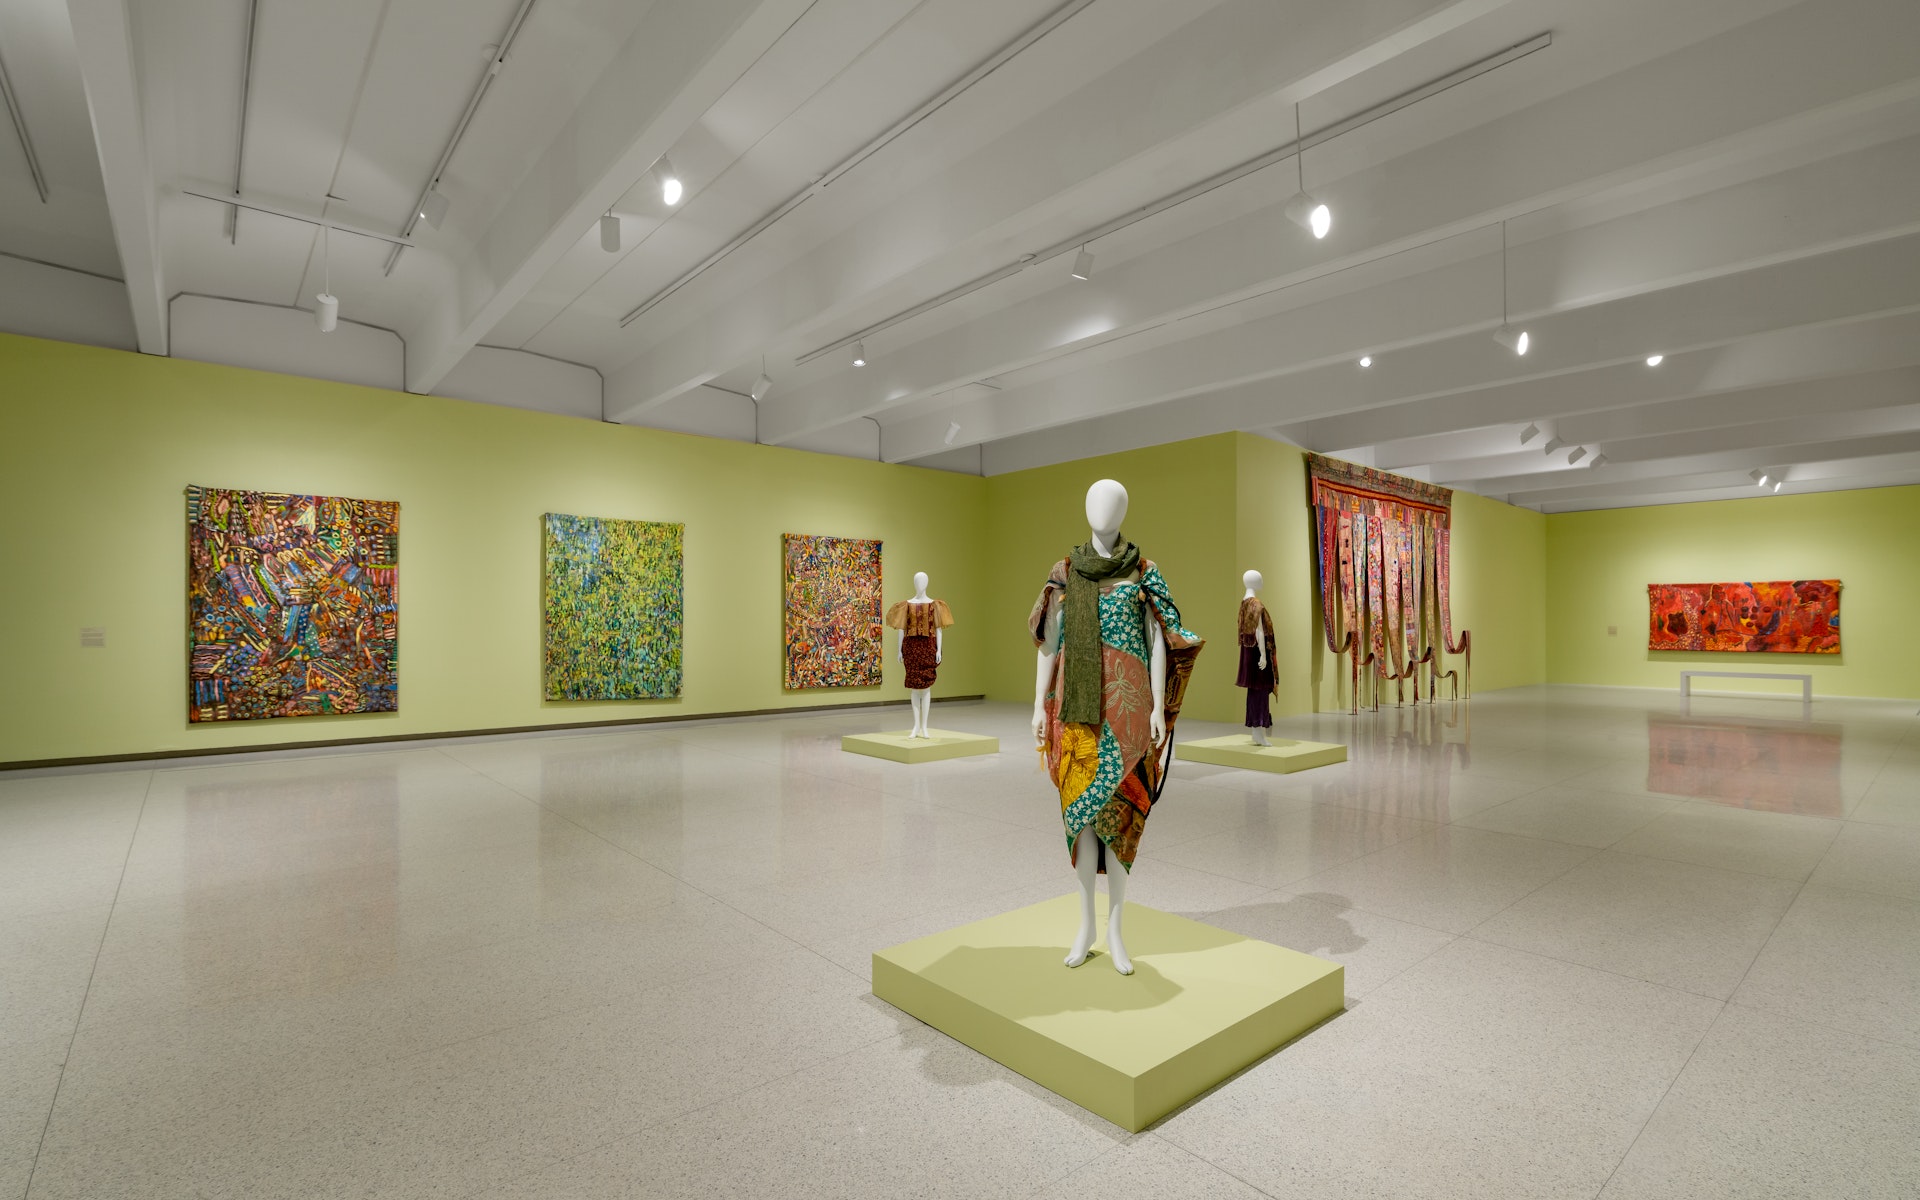 View of a art gallery with green walls that have colorful textile works hanging from the walls and colorful wrap dresses on manniquins.